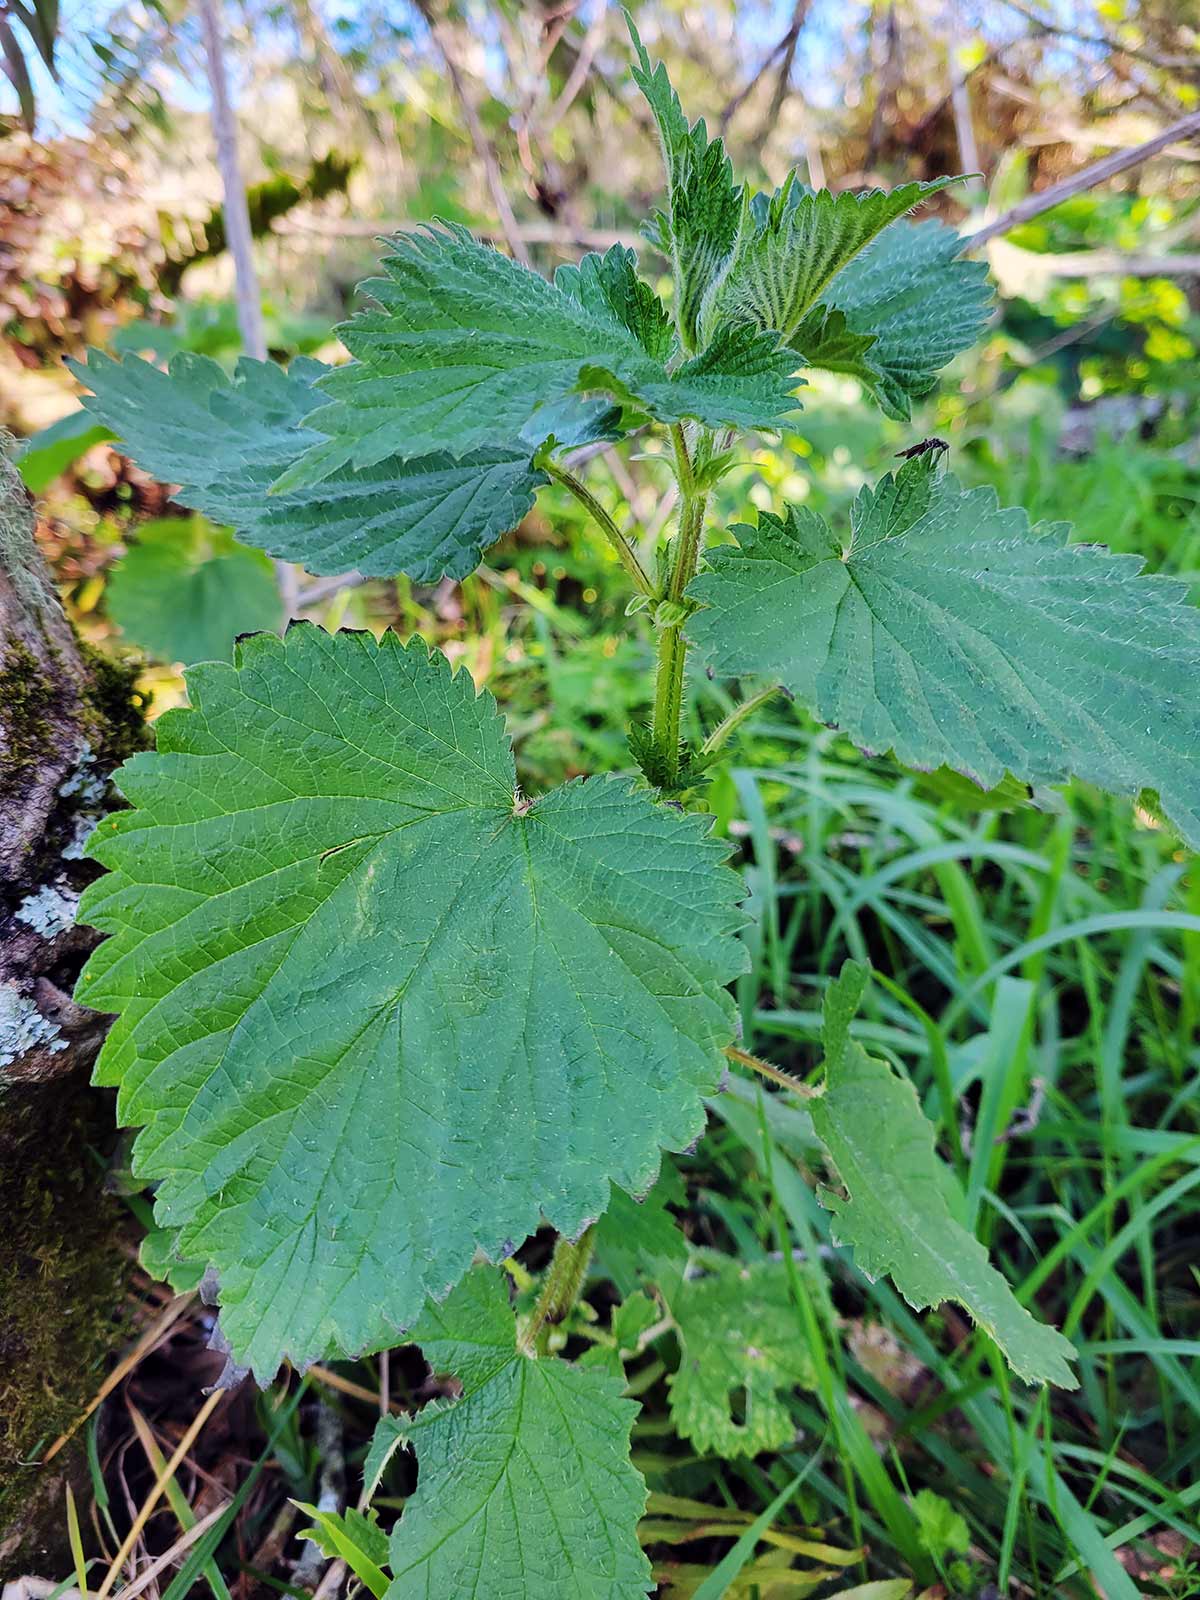 Stinging nettles growing in Northern California